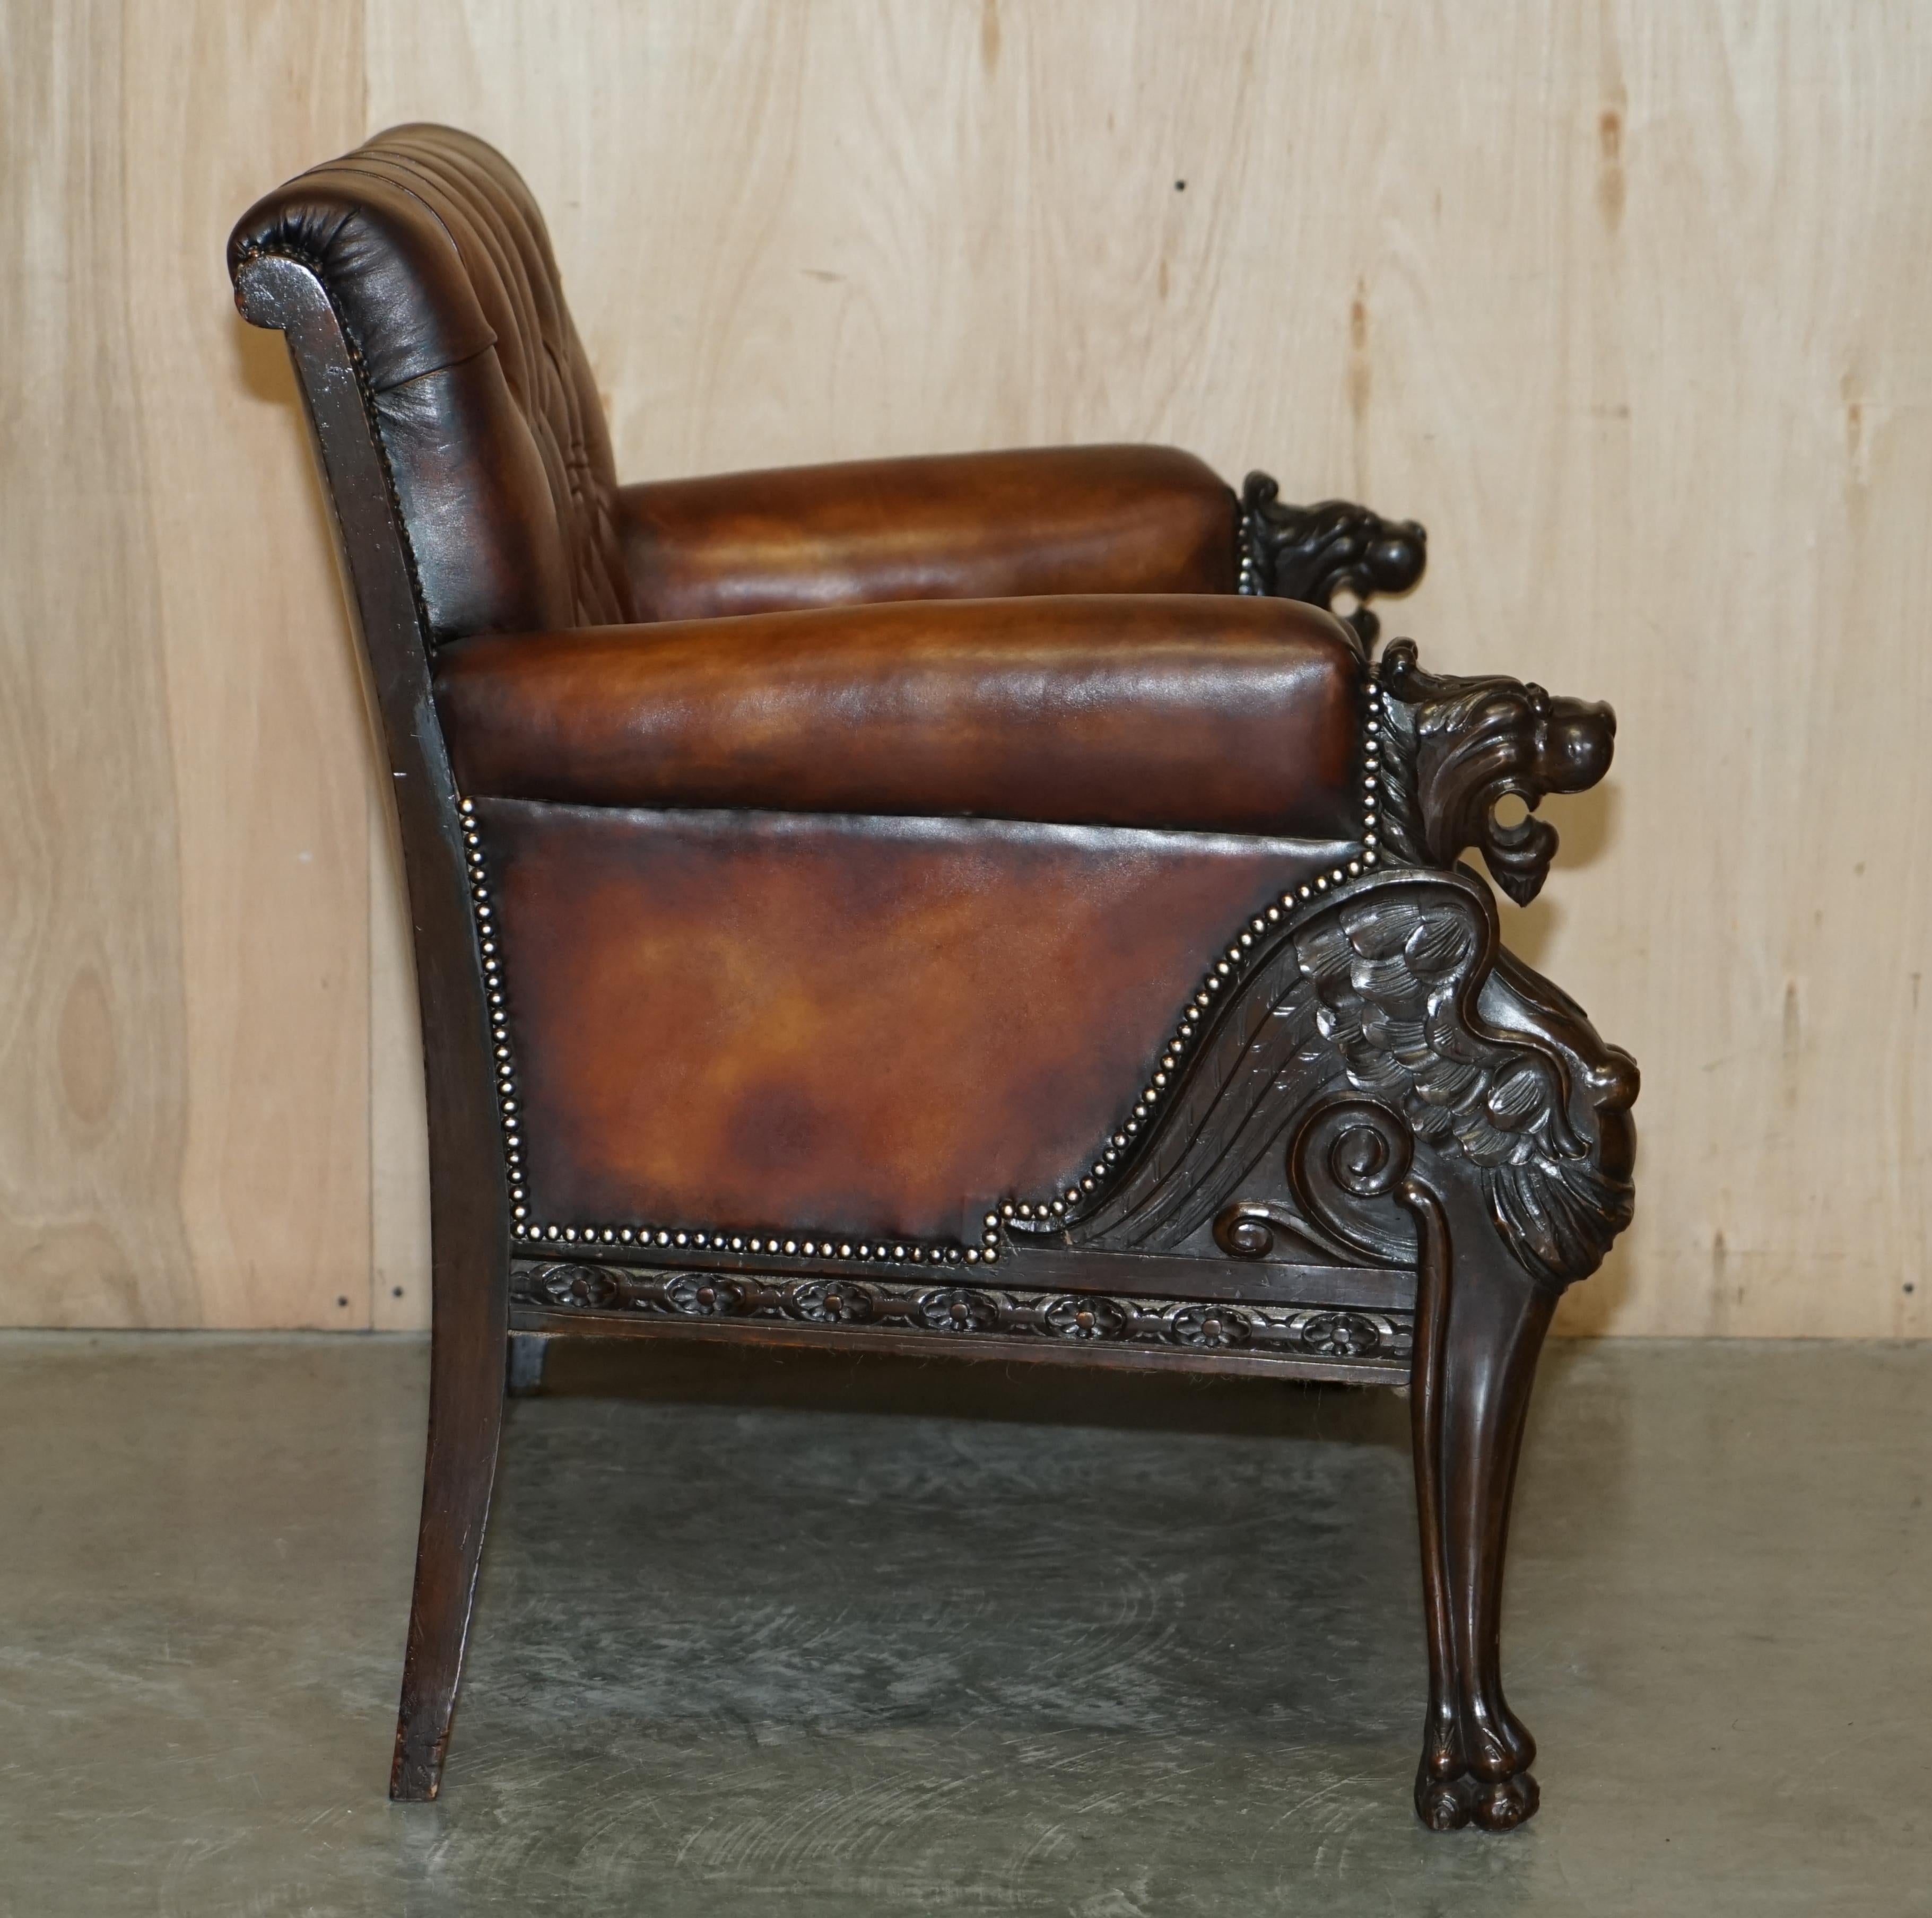 RESTORED ANTIQUE LiON HAND CARVED BROWN LEATHER CHESTERFIELD SOFA ARMCHAIR SUITE im Angebot 4